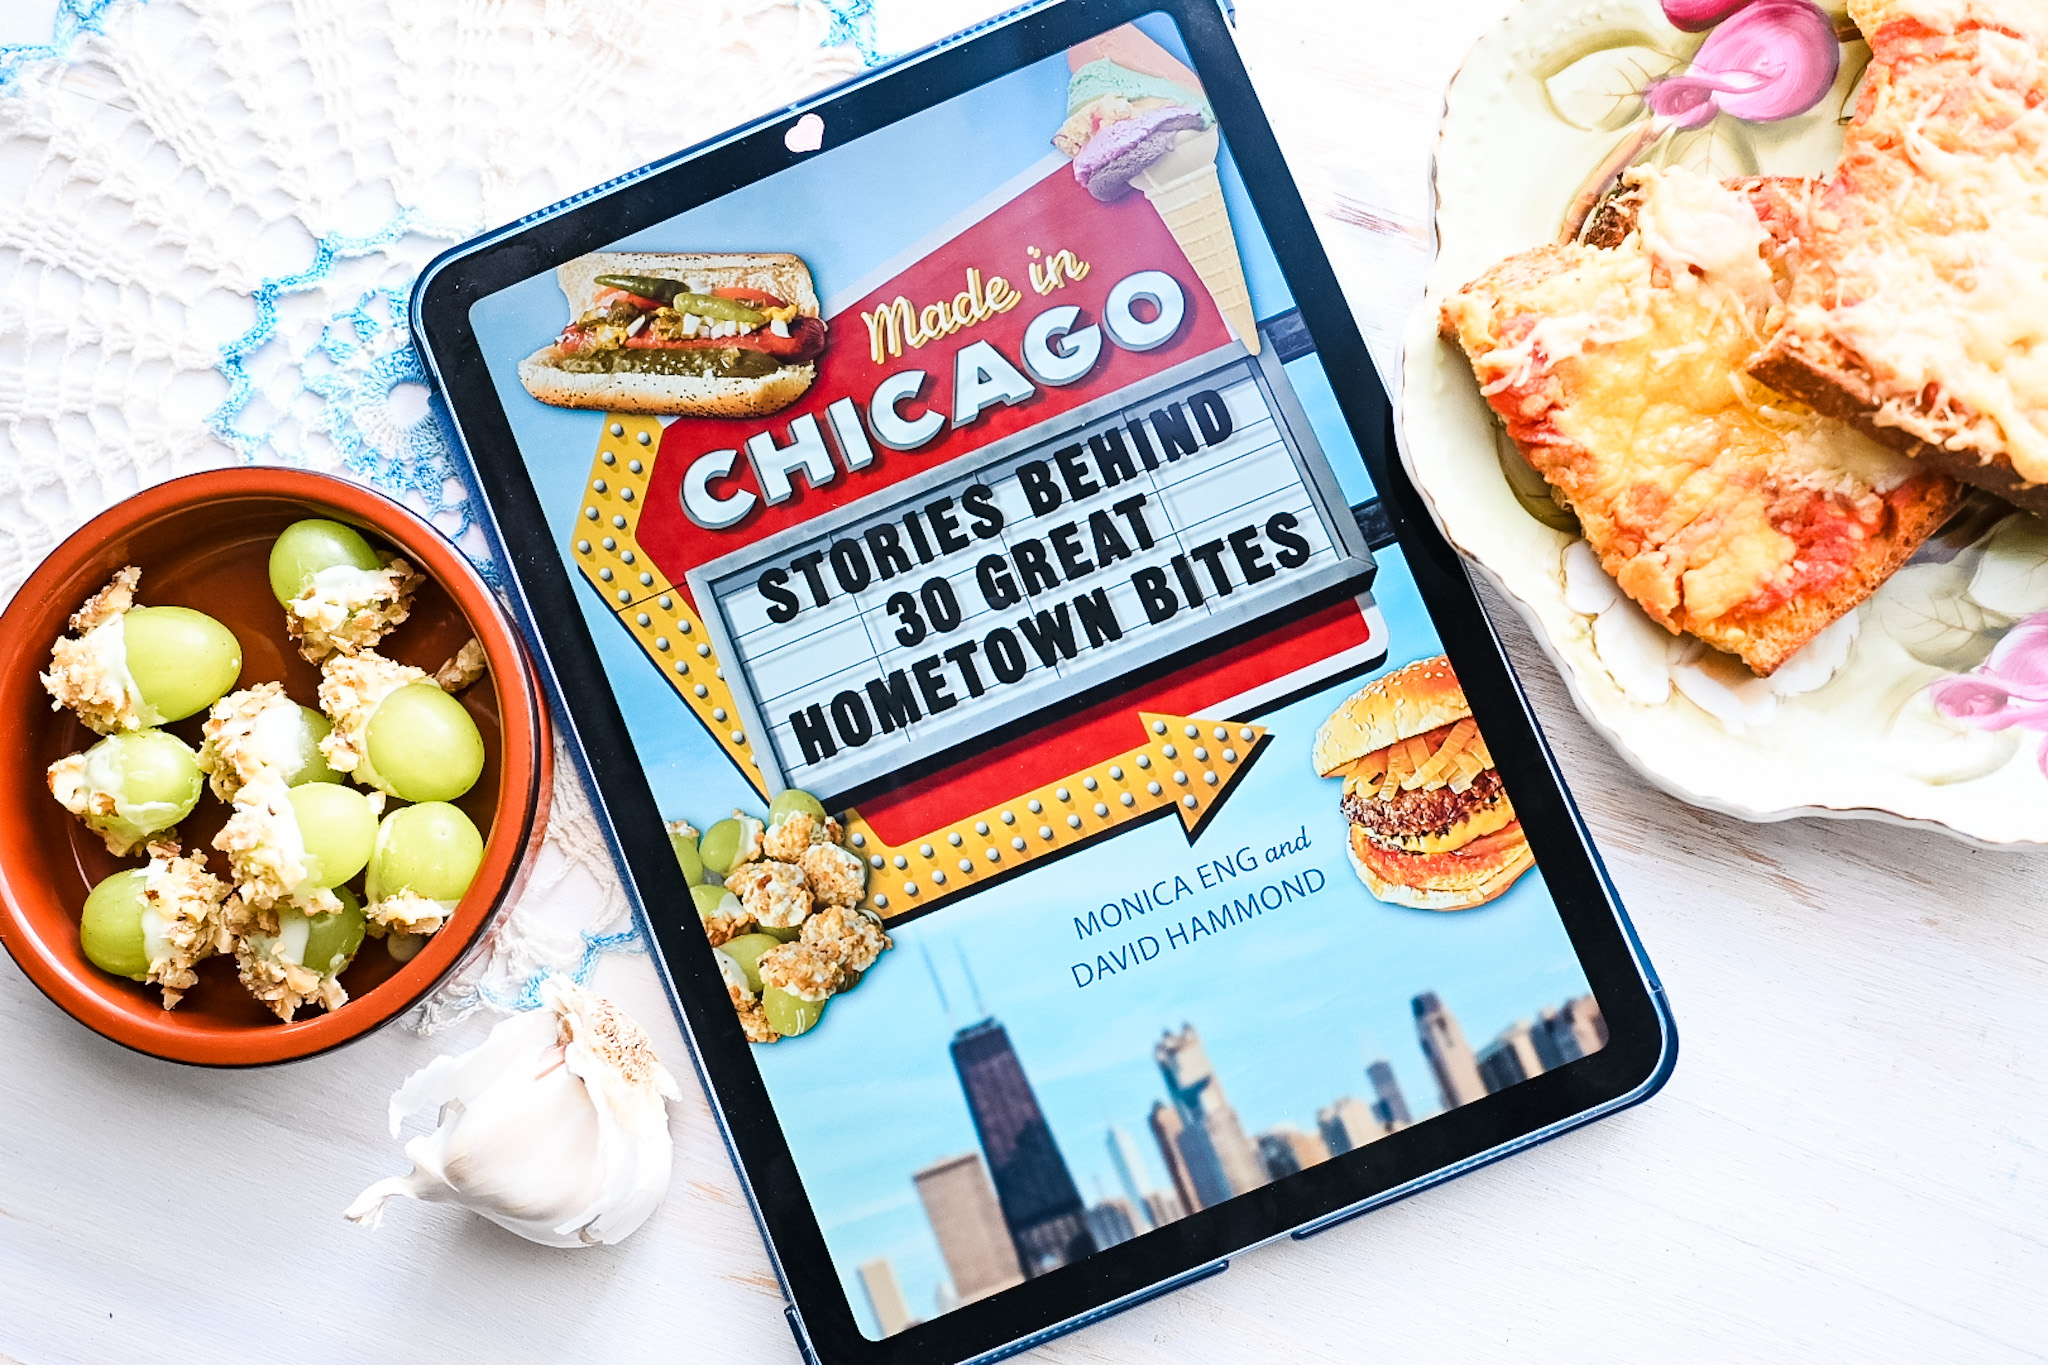 Made in Chicago: Stories Behind 30 Great Hometown Bites by Monica Eng and David Hammond